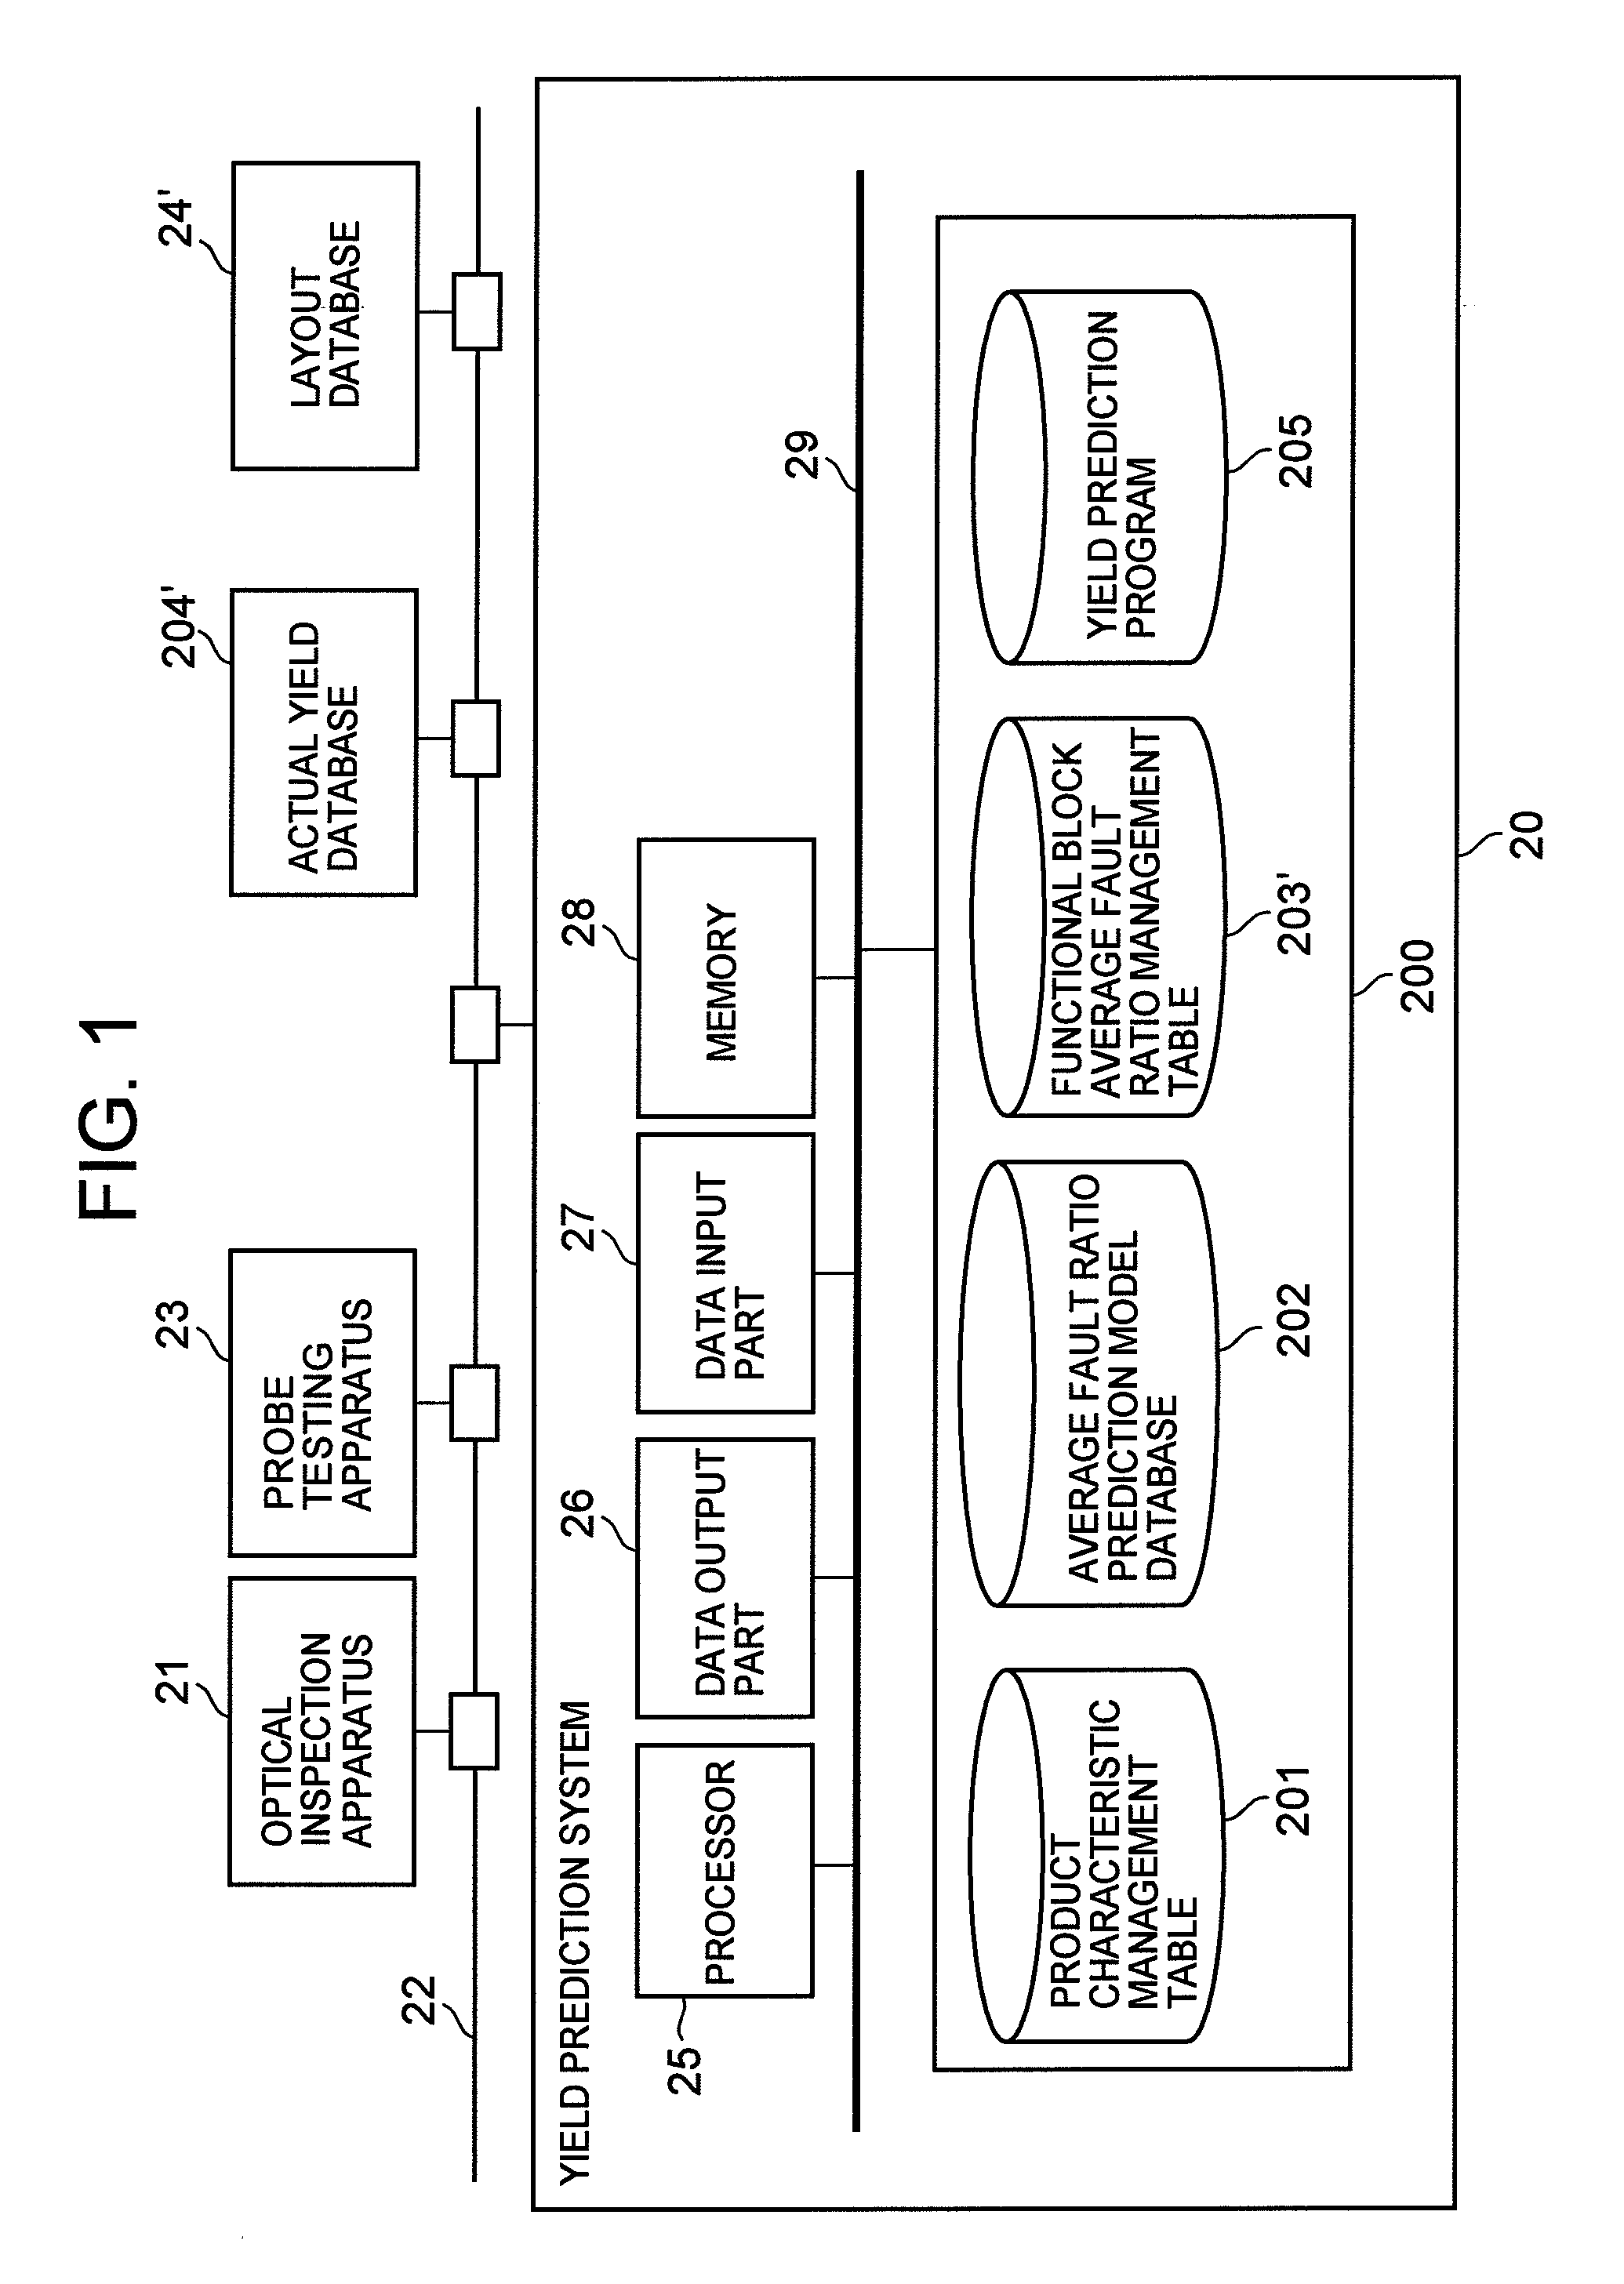 Semiconductor device yield prediction system and method